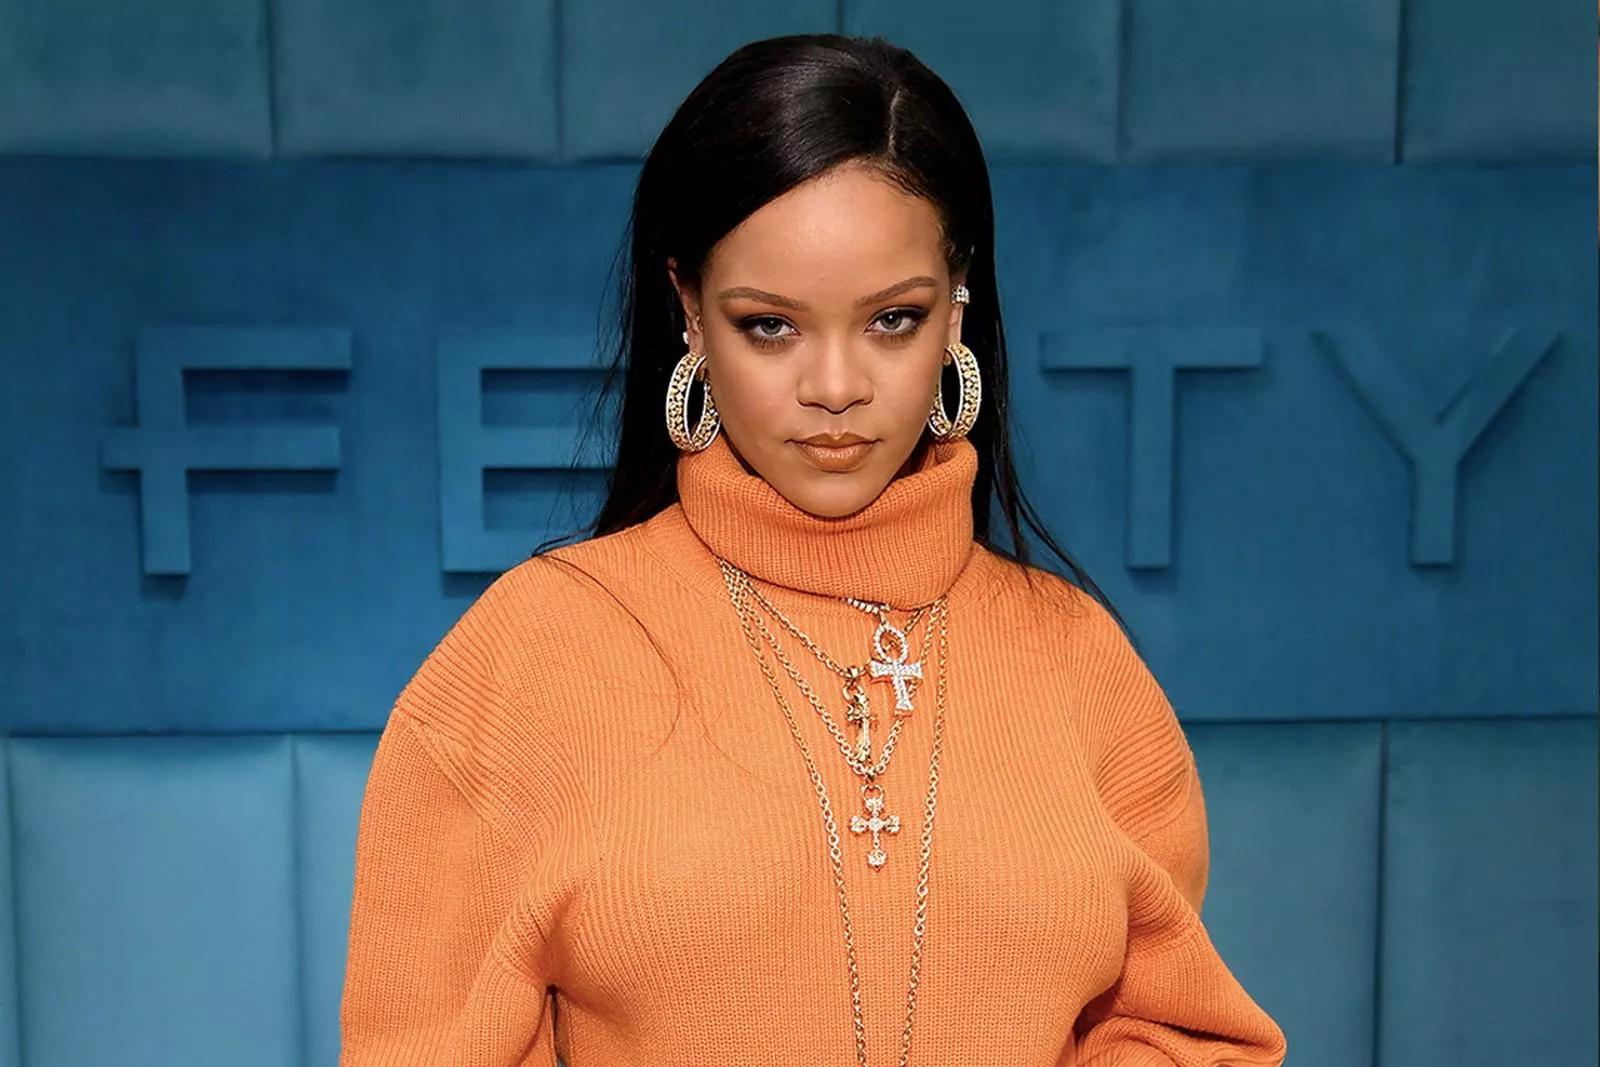 Rihanna's beauty and skin care products are arriving in Africa